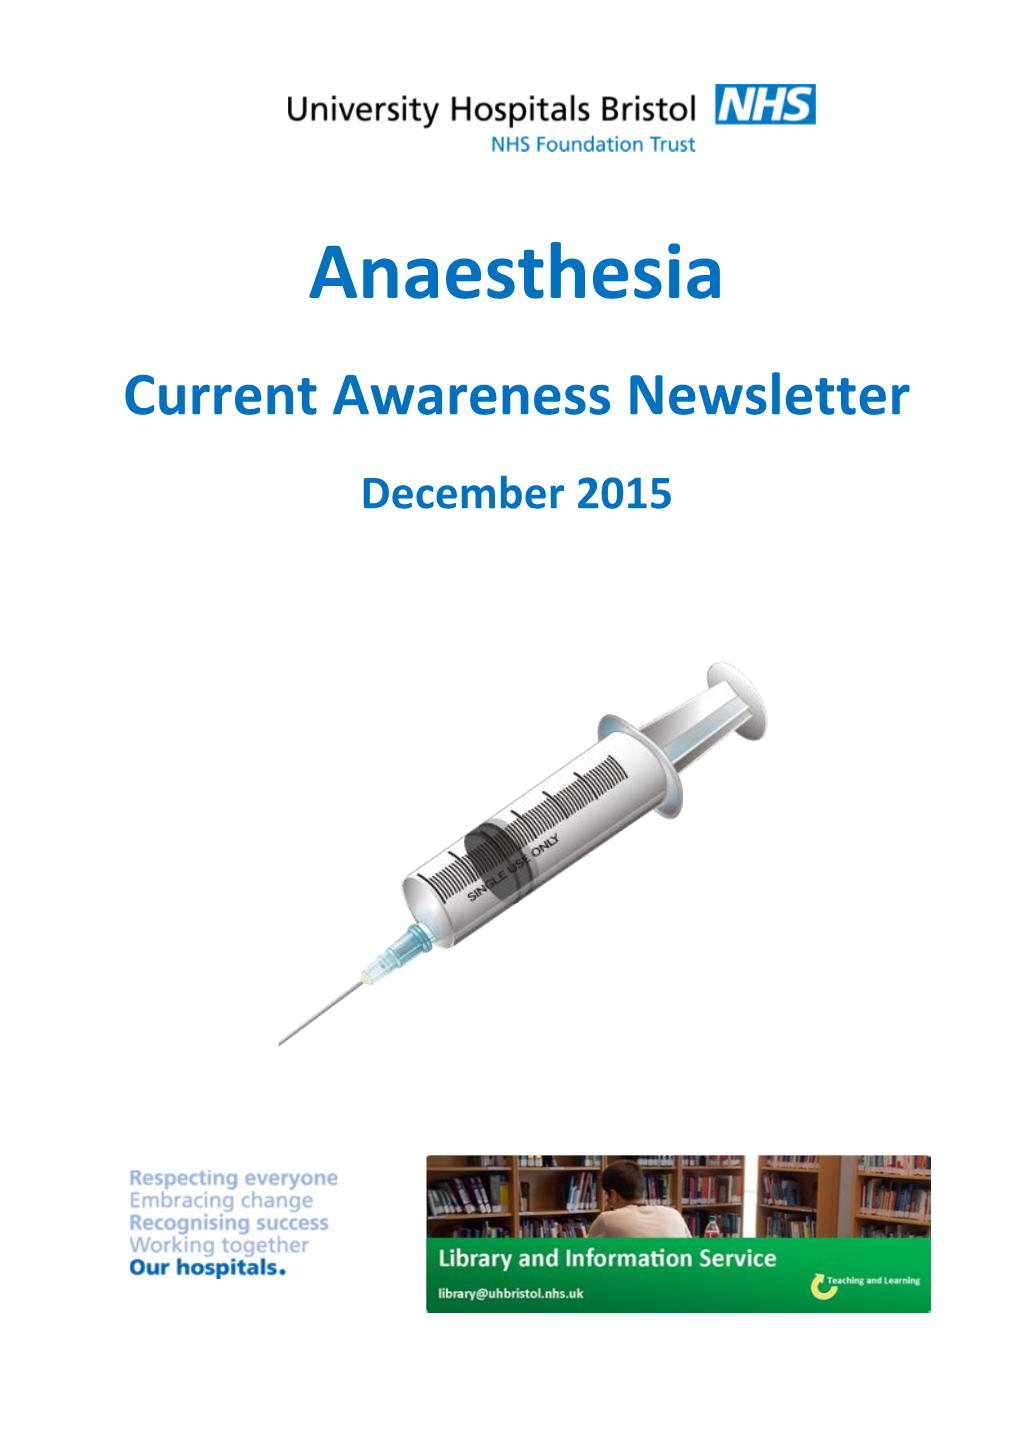 Anaesthesia Current Awareness Newsletter December 2015